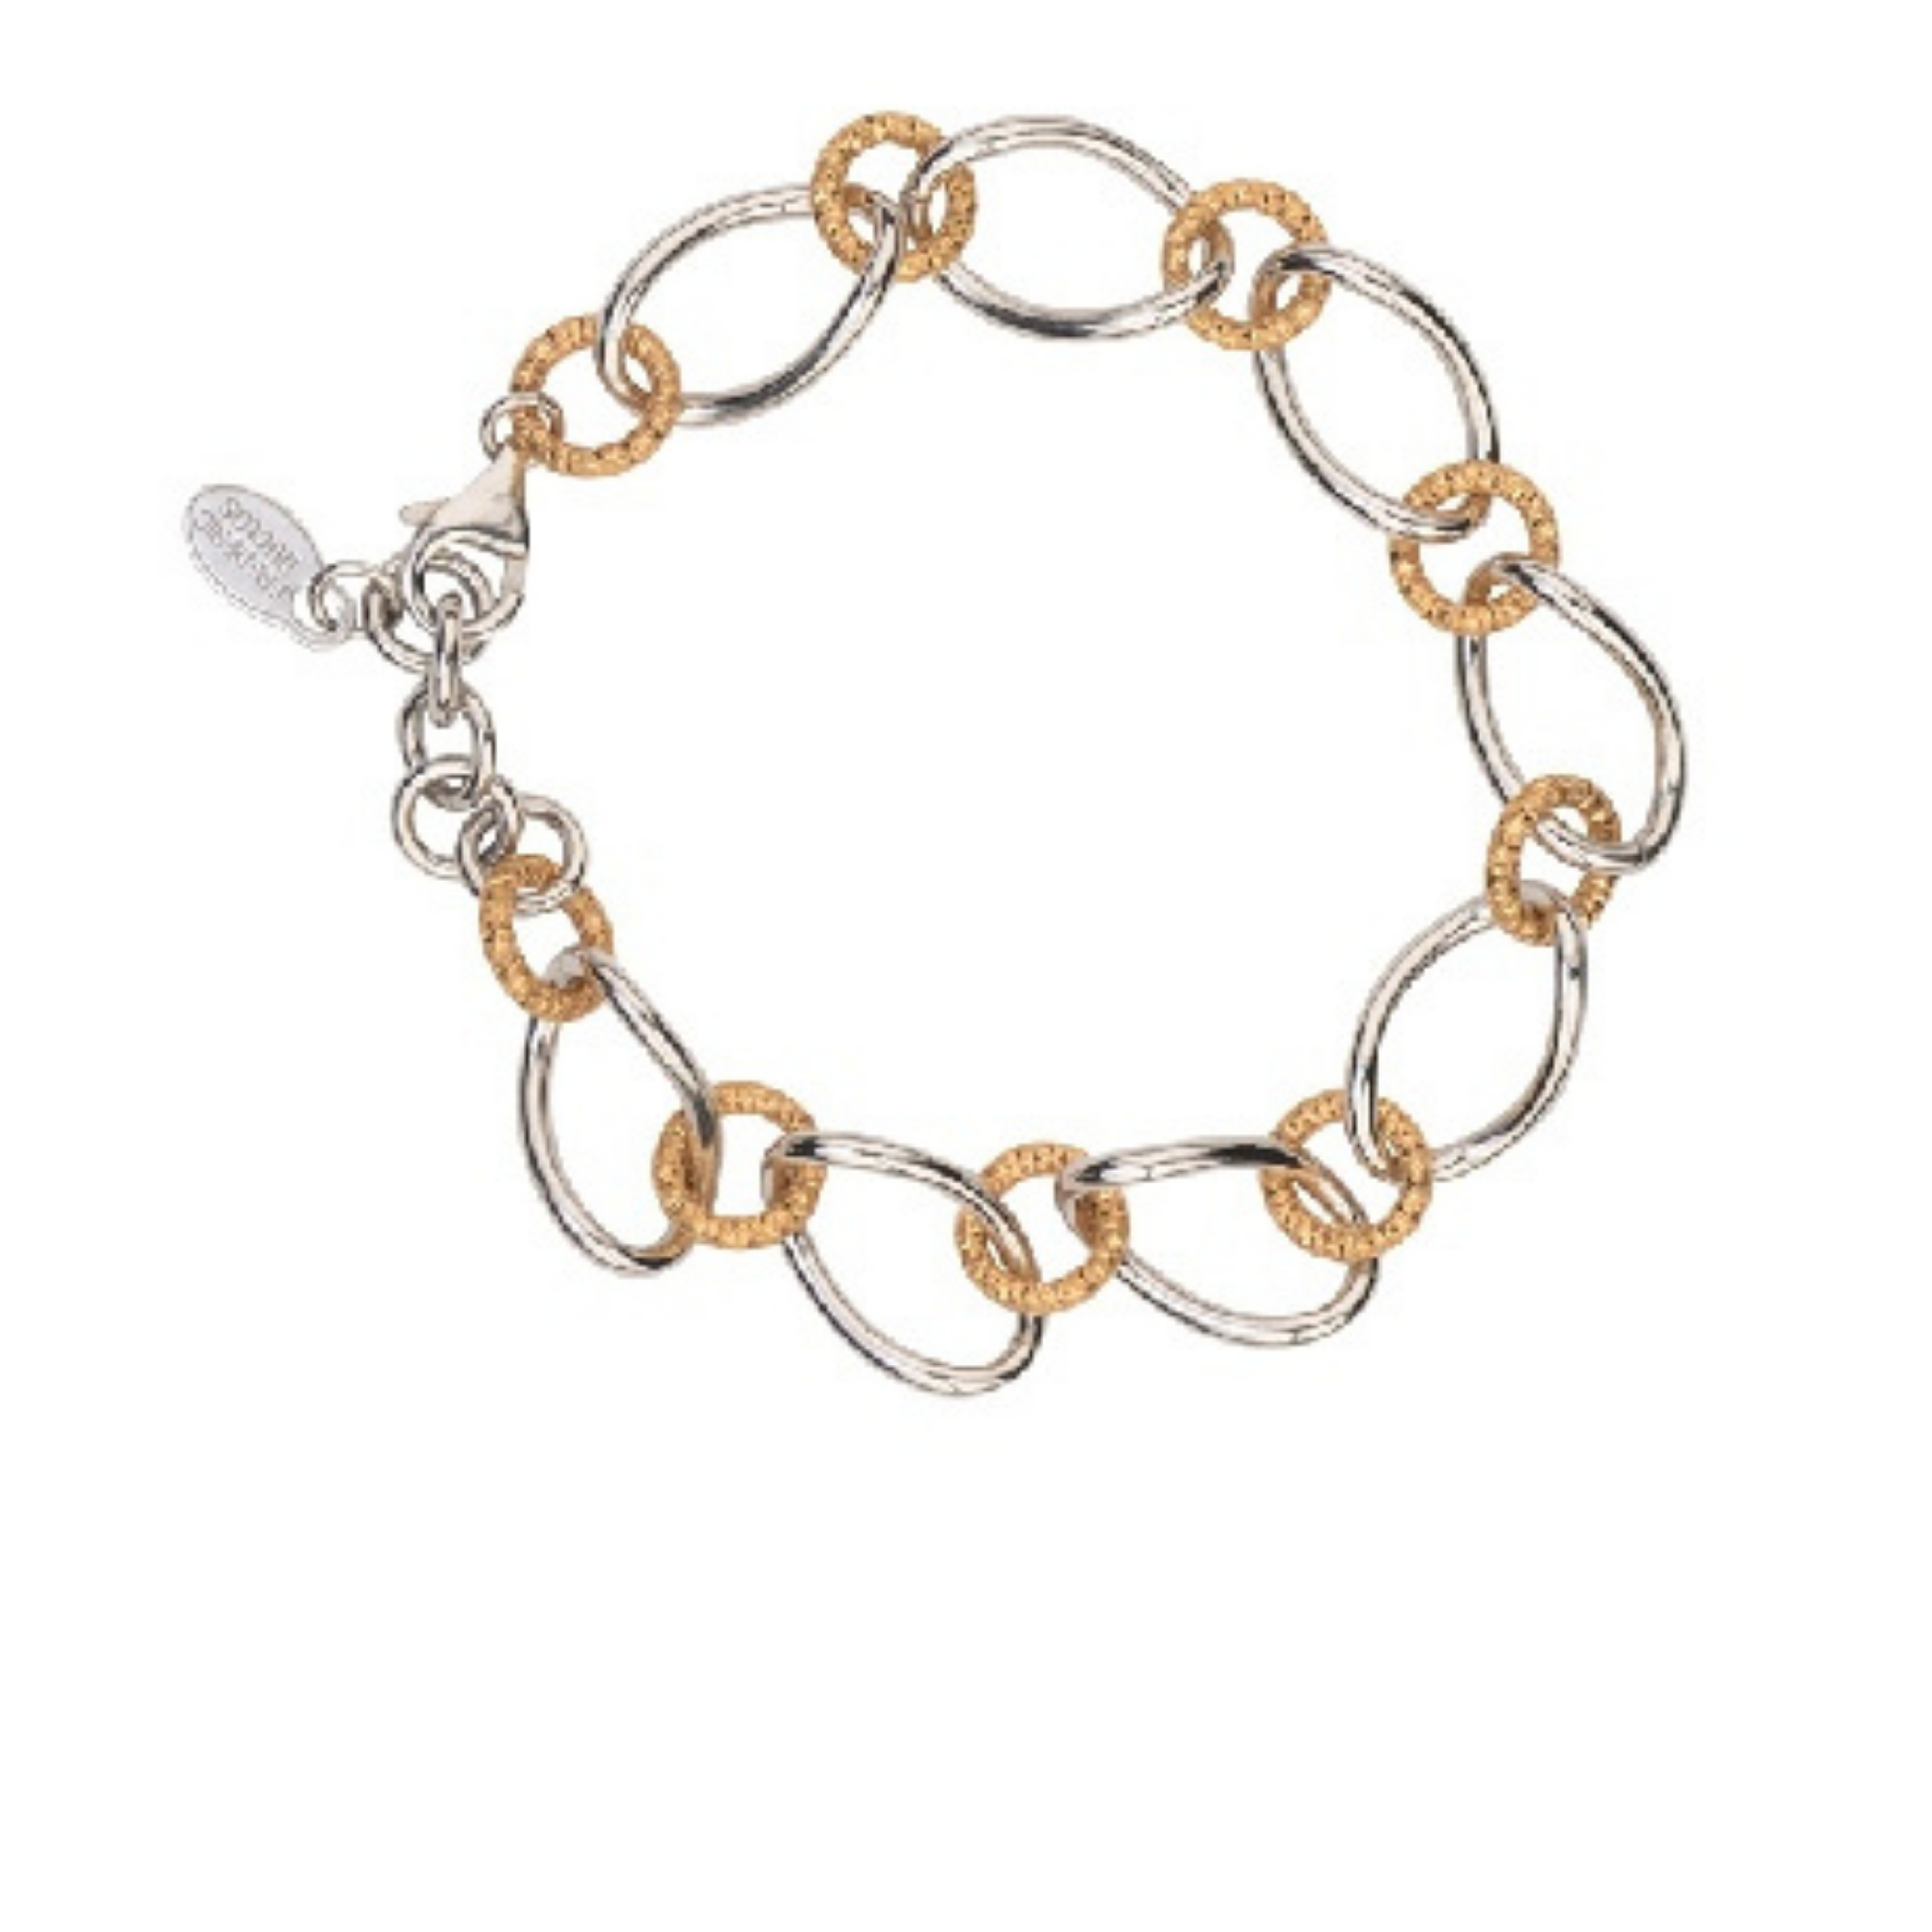 Frederic Duclos Sterling silver and yellow gold-plated oval link bracelet, price upon request at A.T. Thomas Jewelers